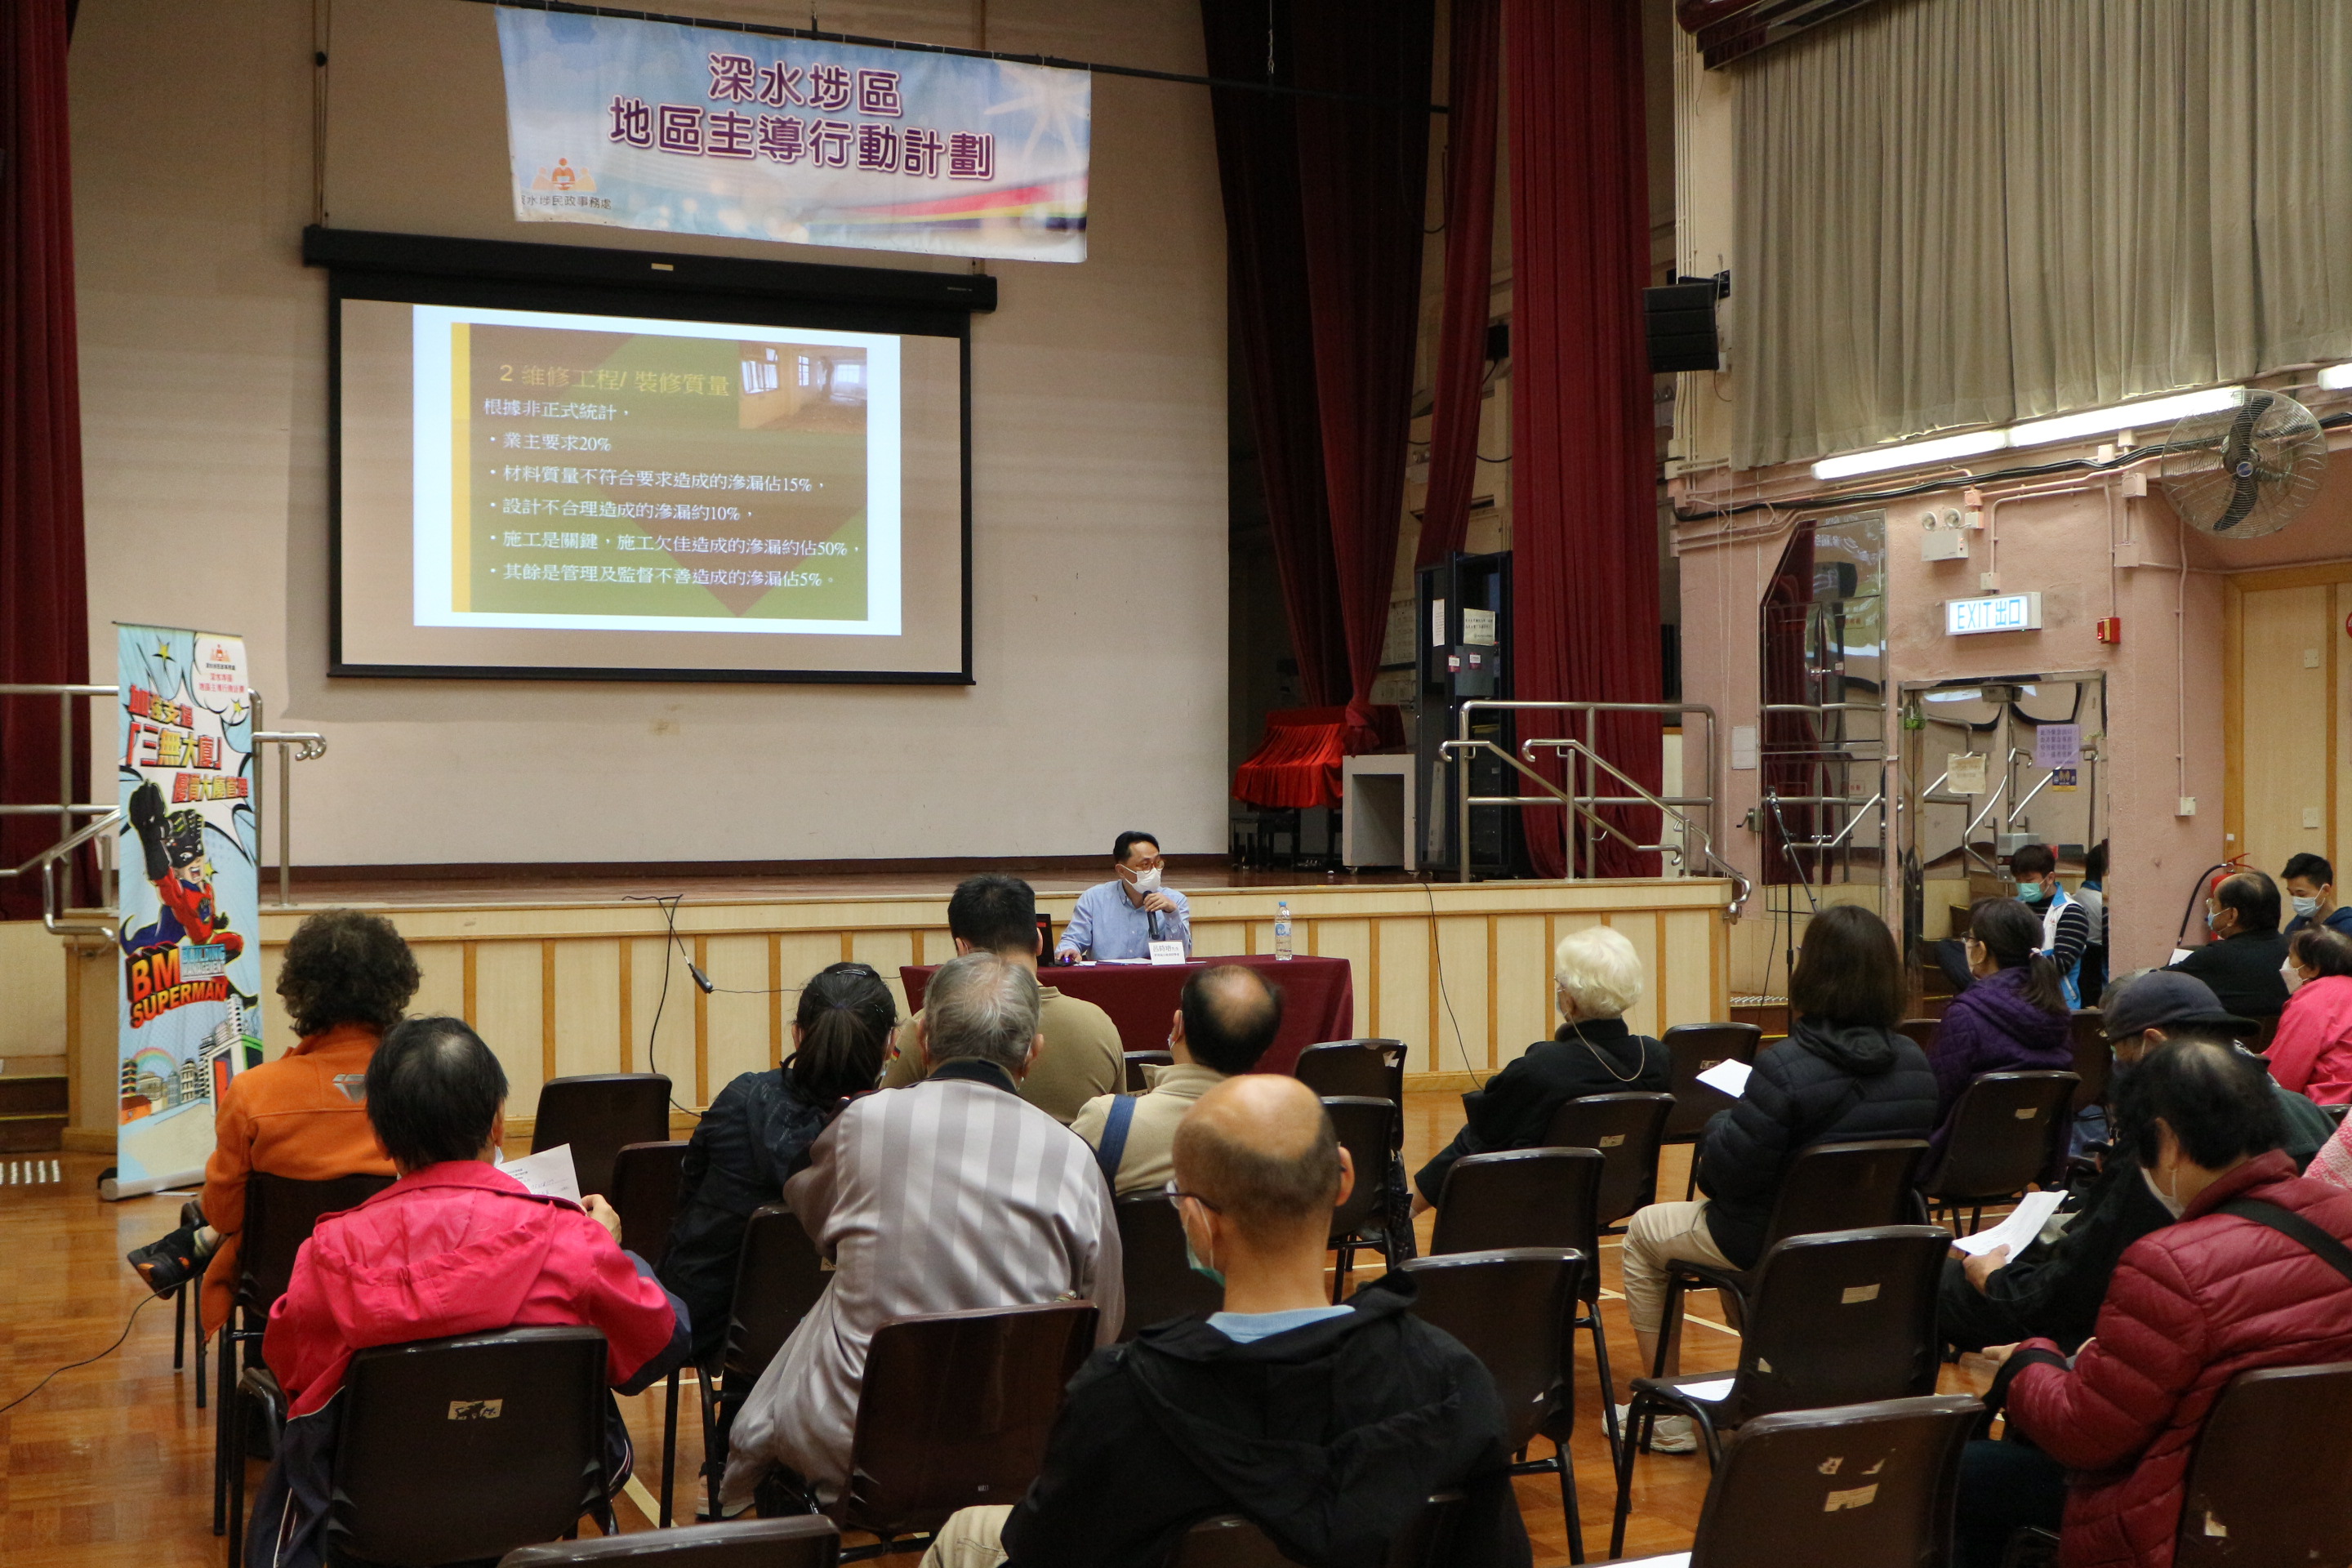 Sham Shui Po District-led Actions Scheme – Building Management Talk (Presentation on “Improve the Professionalism of Water Leakage and Waterproofing”)